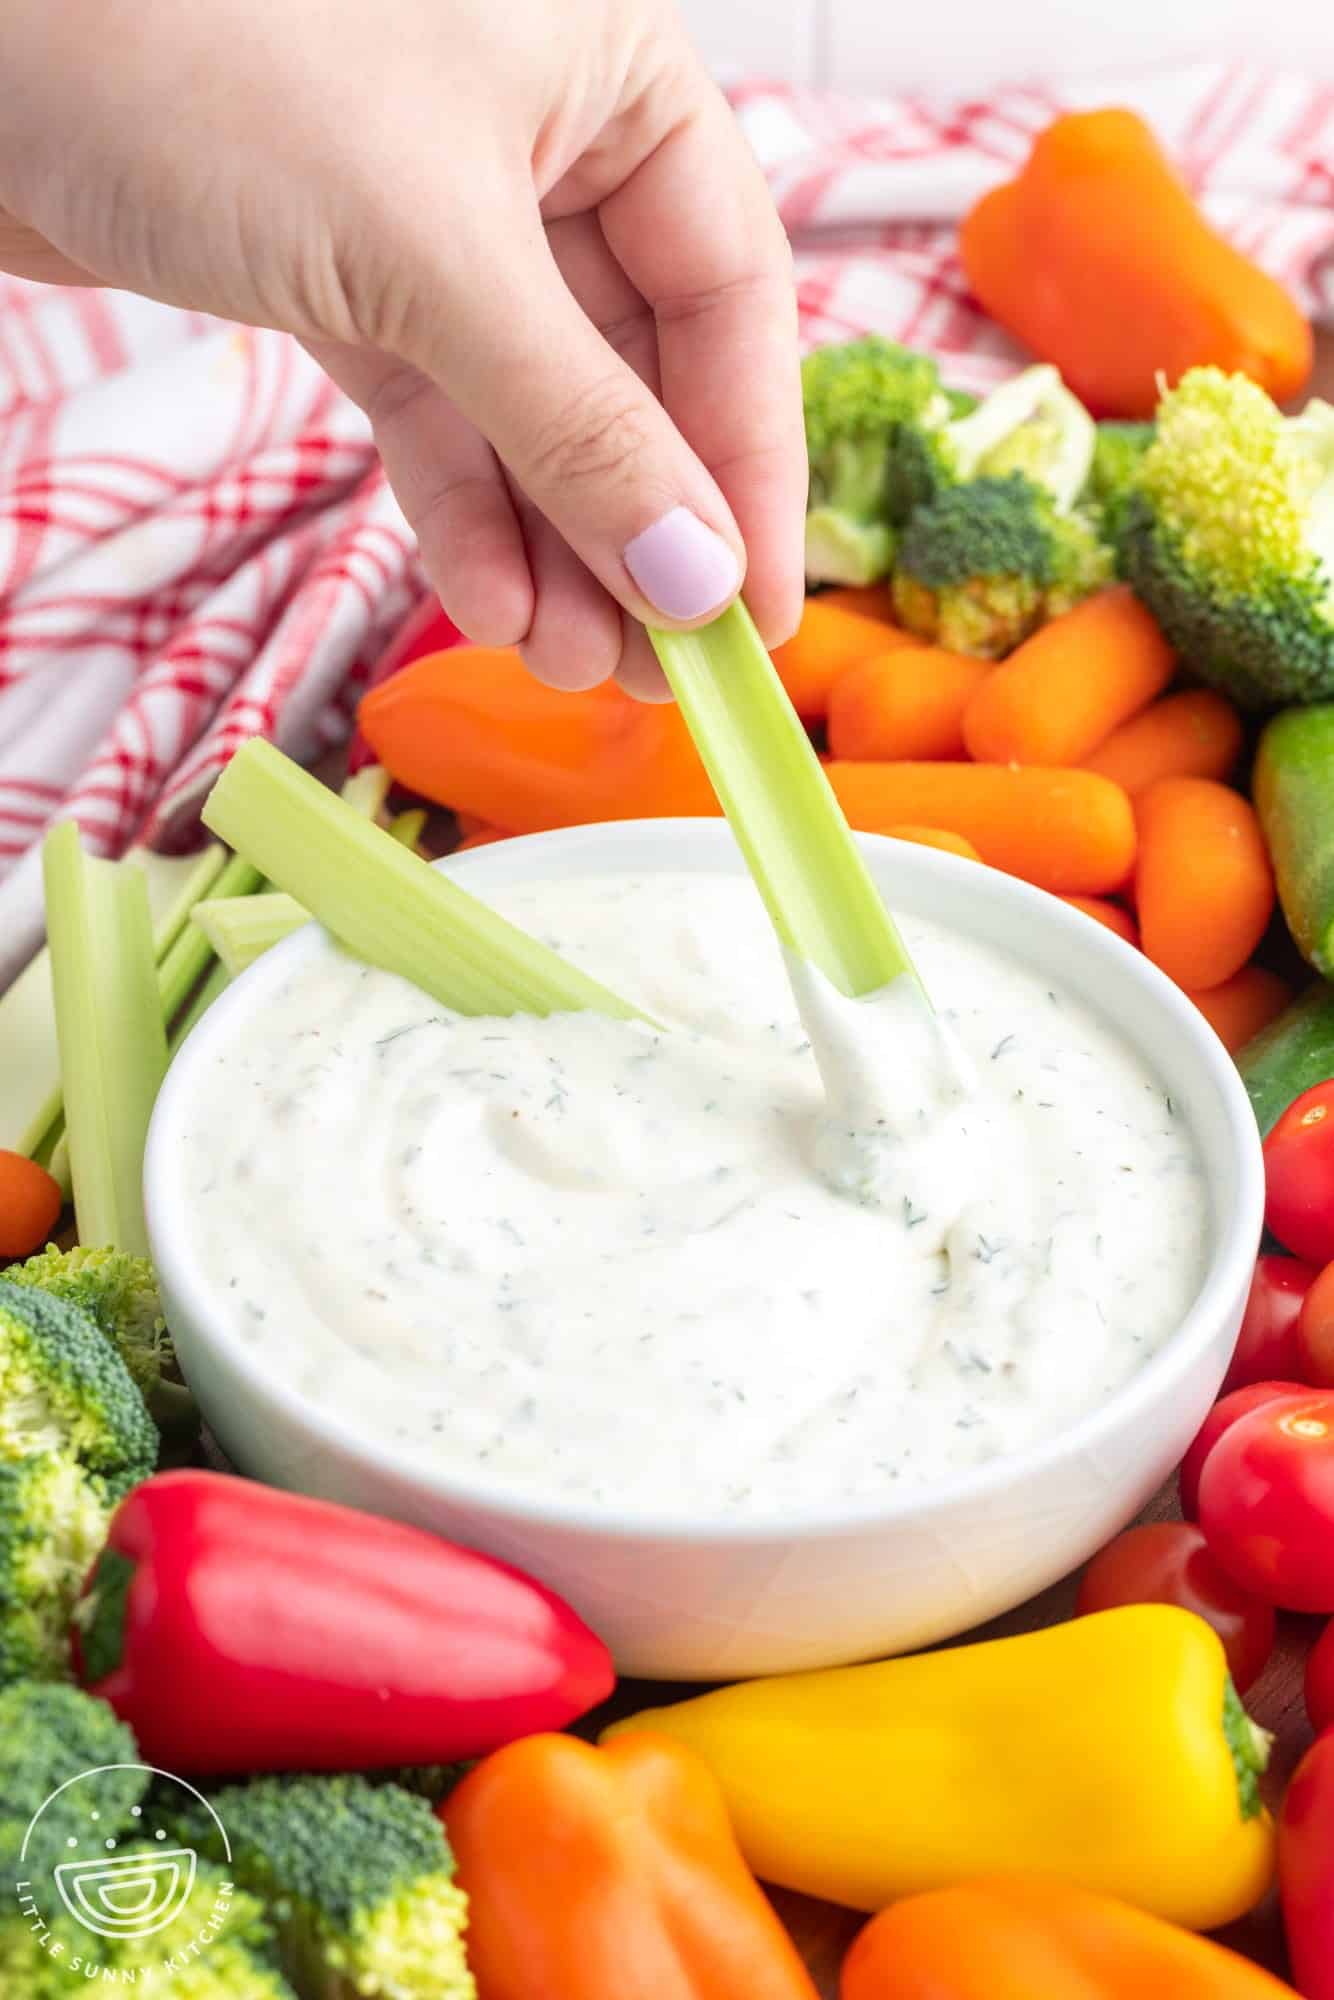 a hand dipping a celery stick into a bowl of easy veggie dip that is on a vegetable platter.